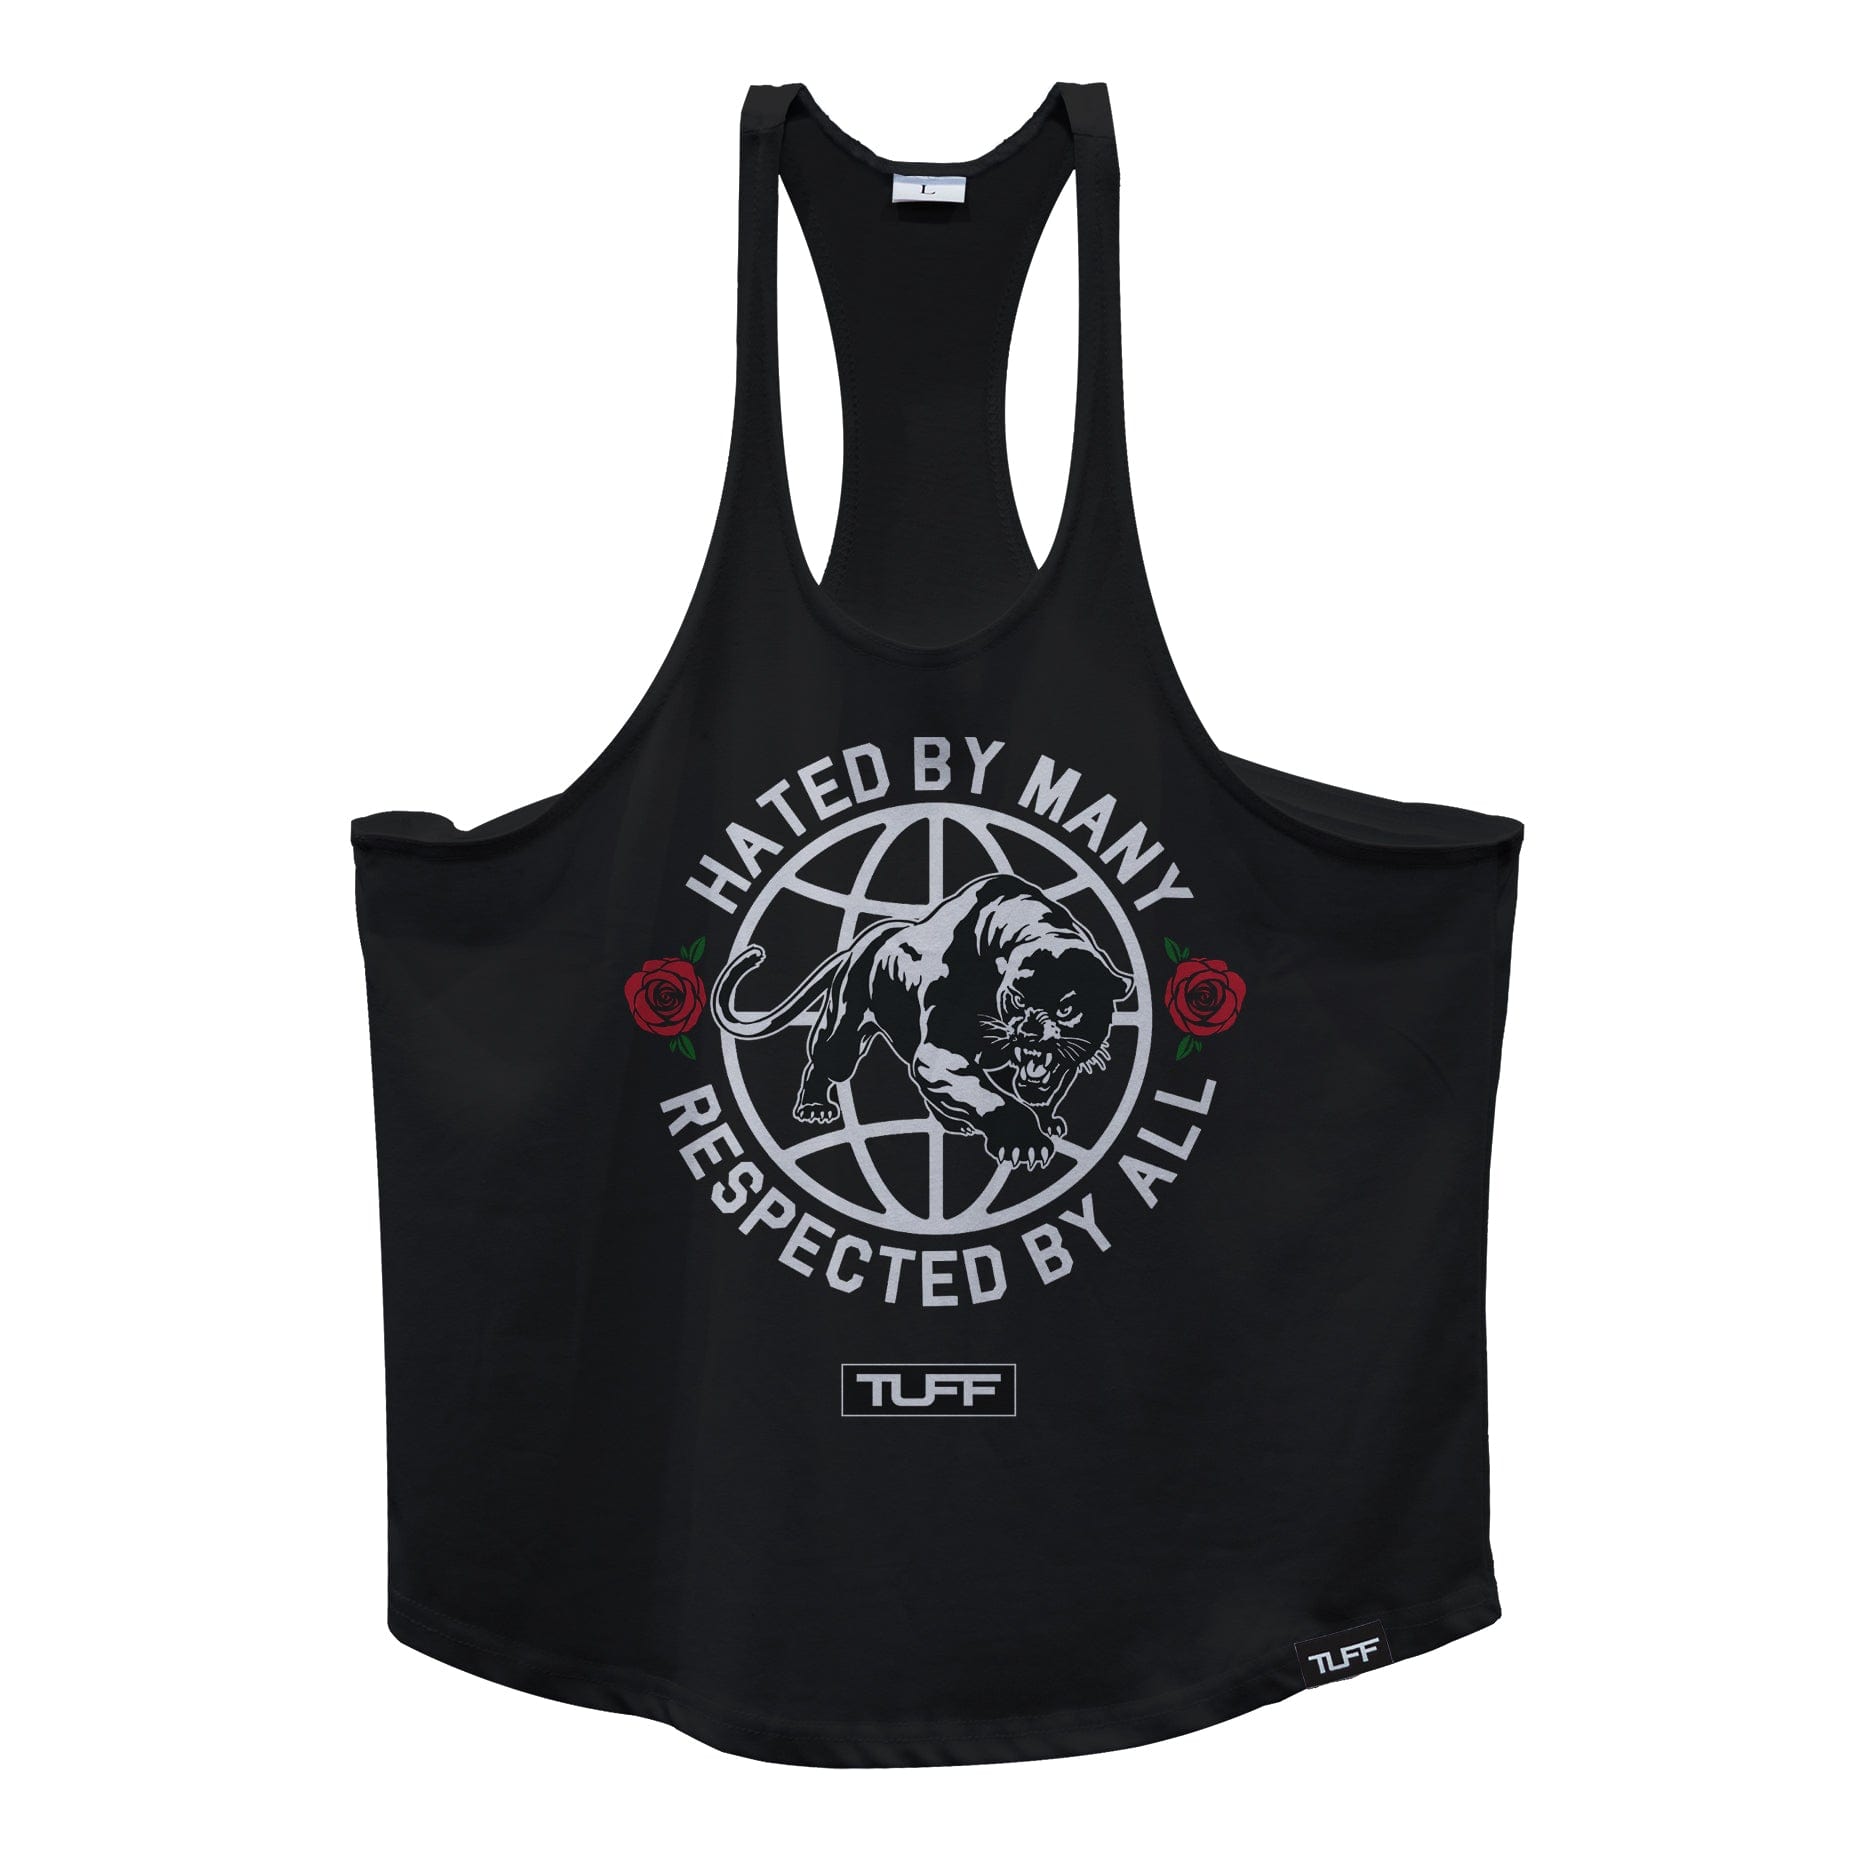 Hated By Many, Respected By All Stringer Tank Top - TuffWrapsUK